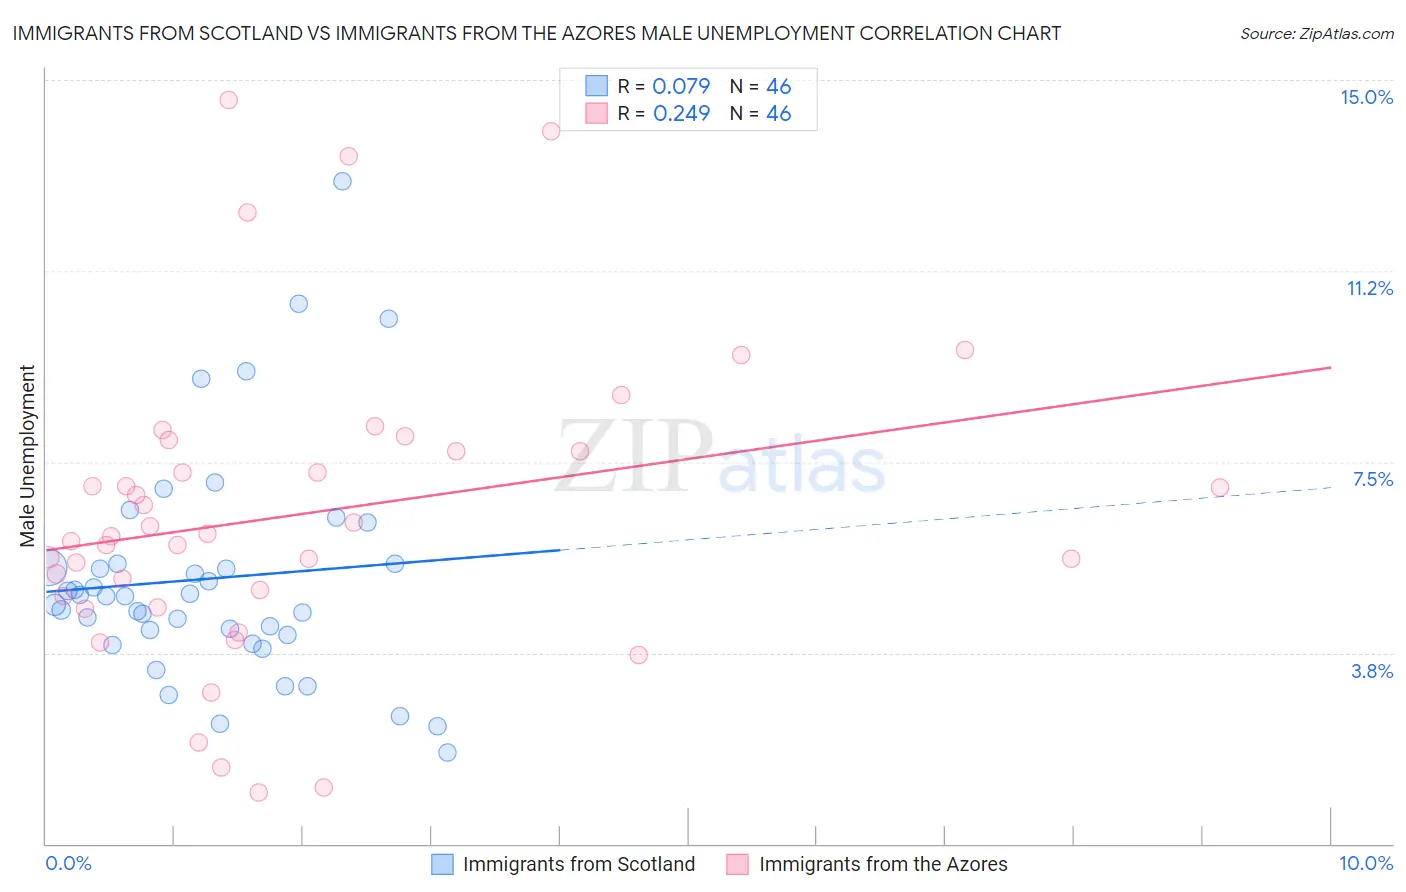 Immigrants from Scotland vs Immigrants from the Azores Male Unemployment